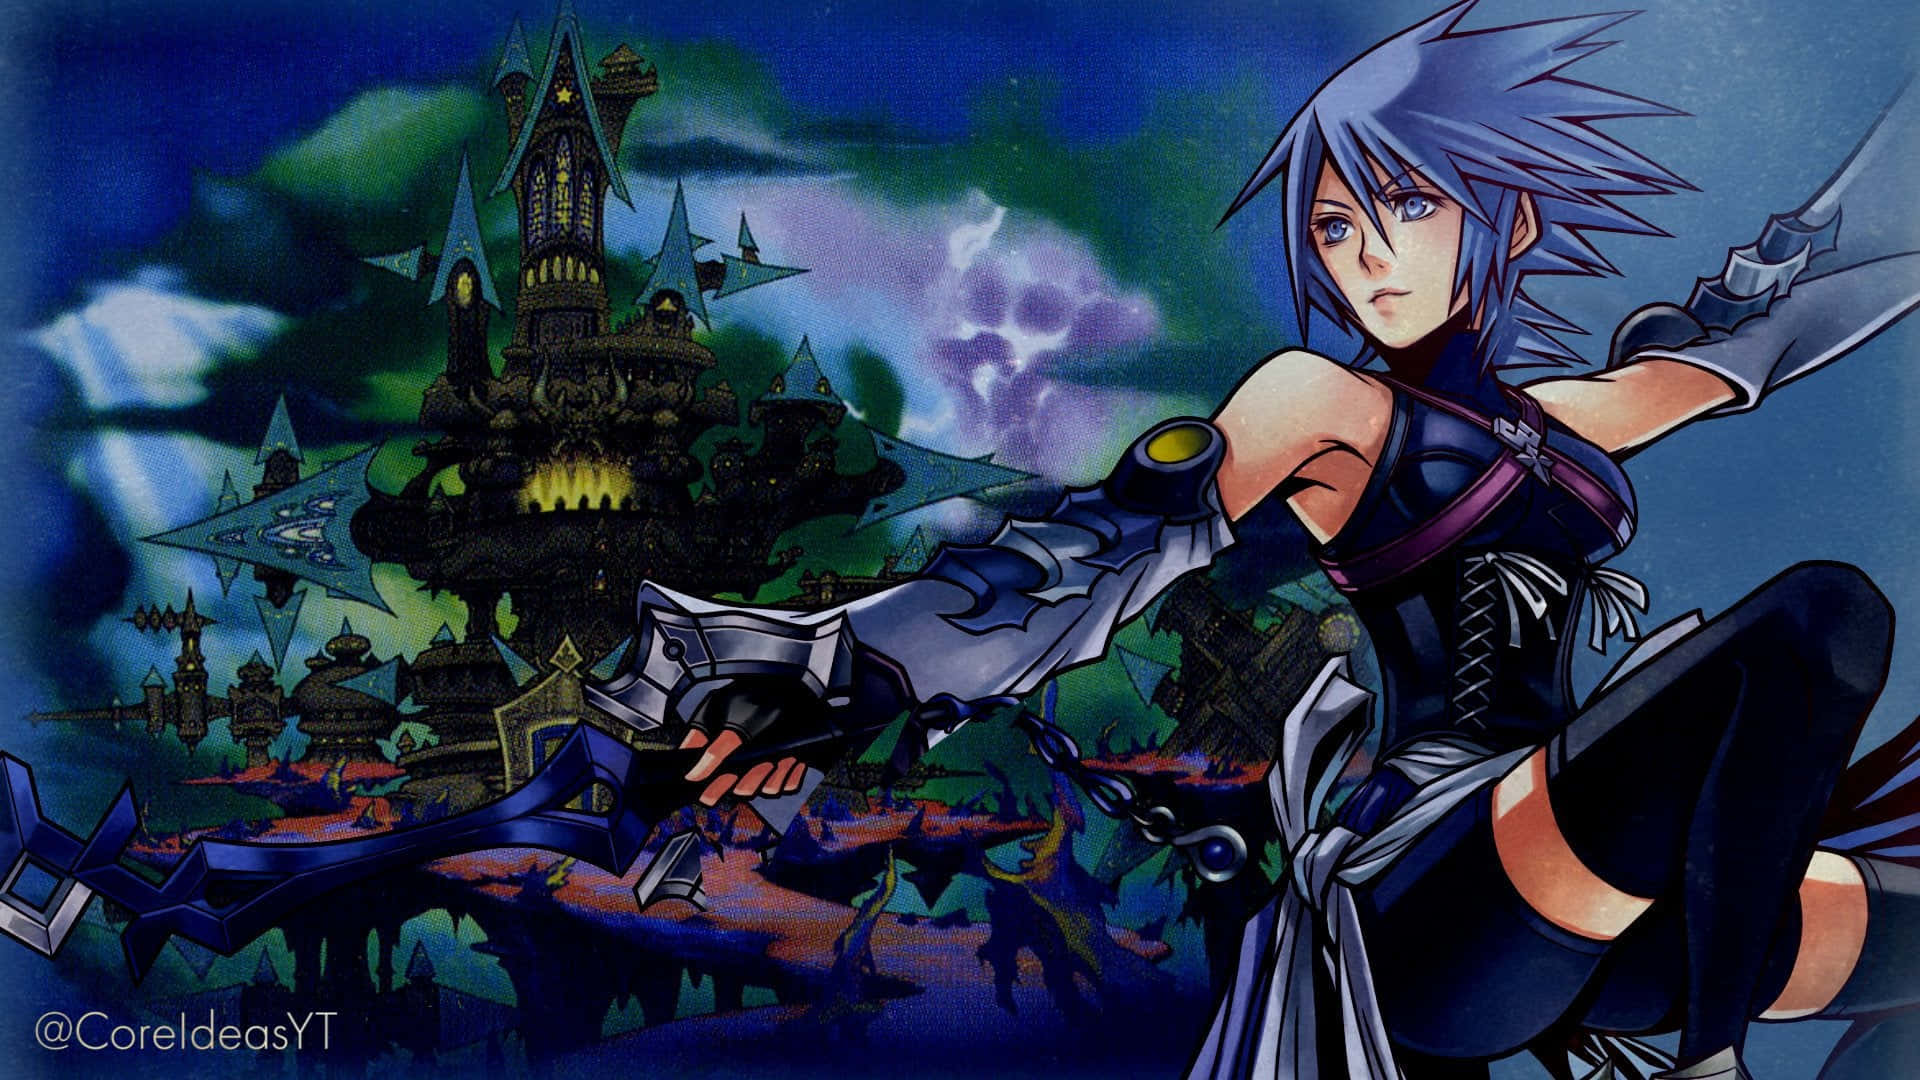 "Welcome to the Magical Realm of Kingdom Hearts". Wallpaper